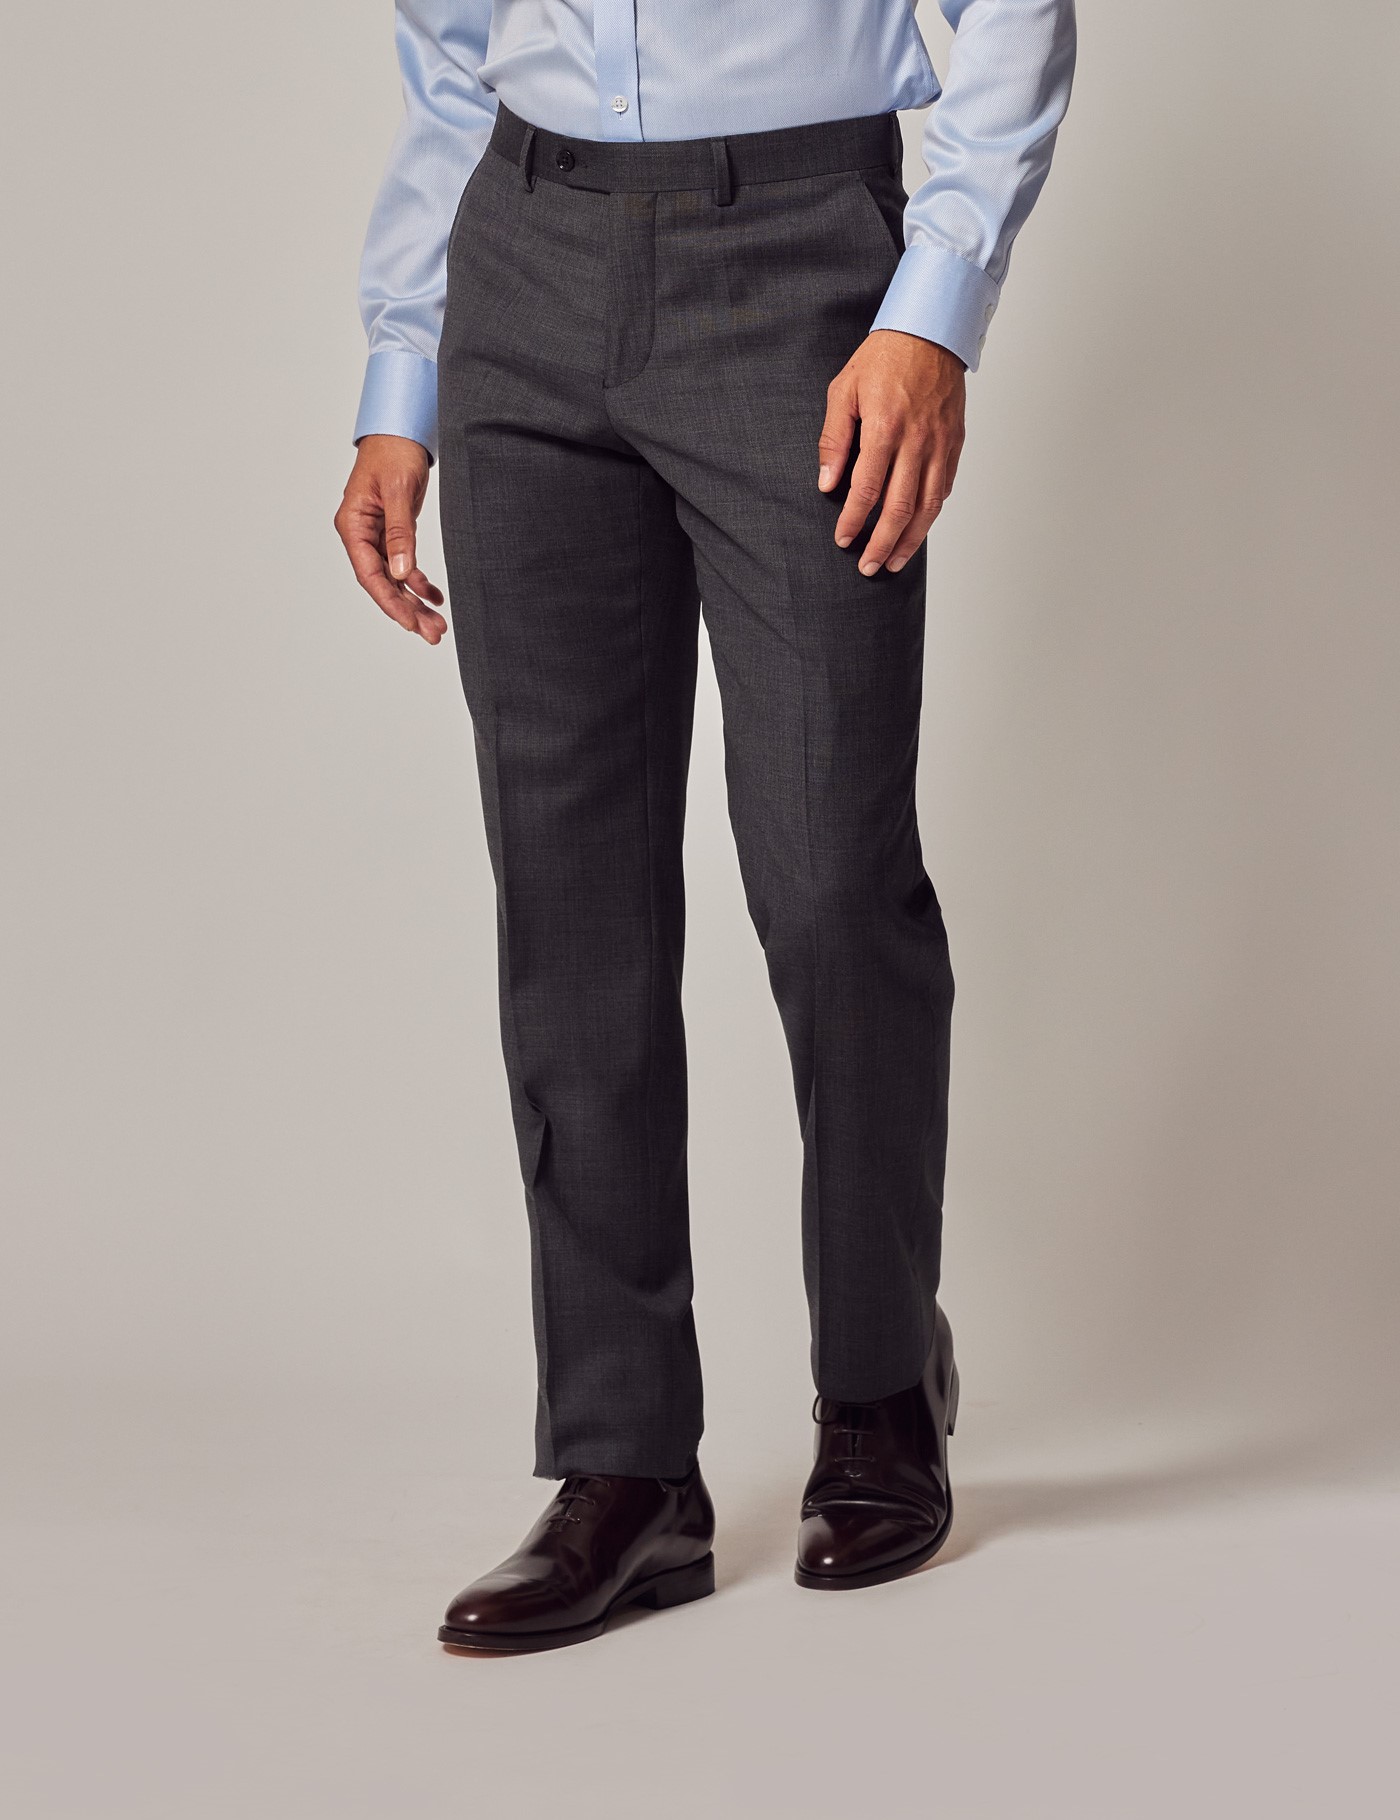 Slim Fit Light Grey Trousers | Buy Online at Moss